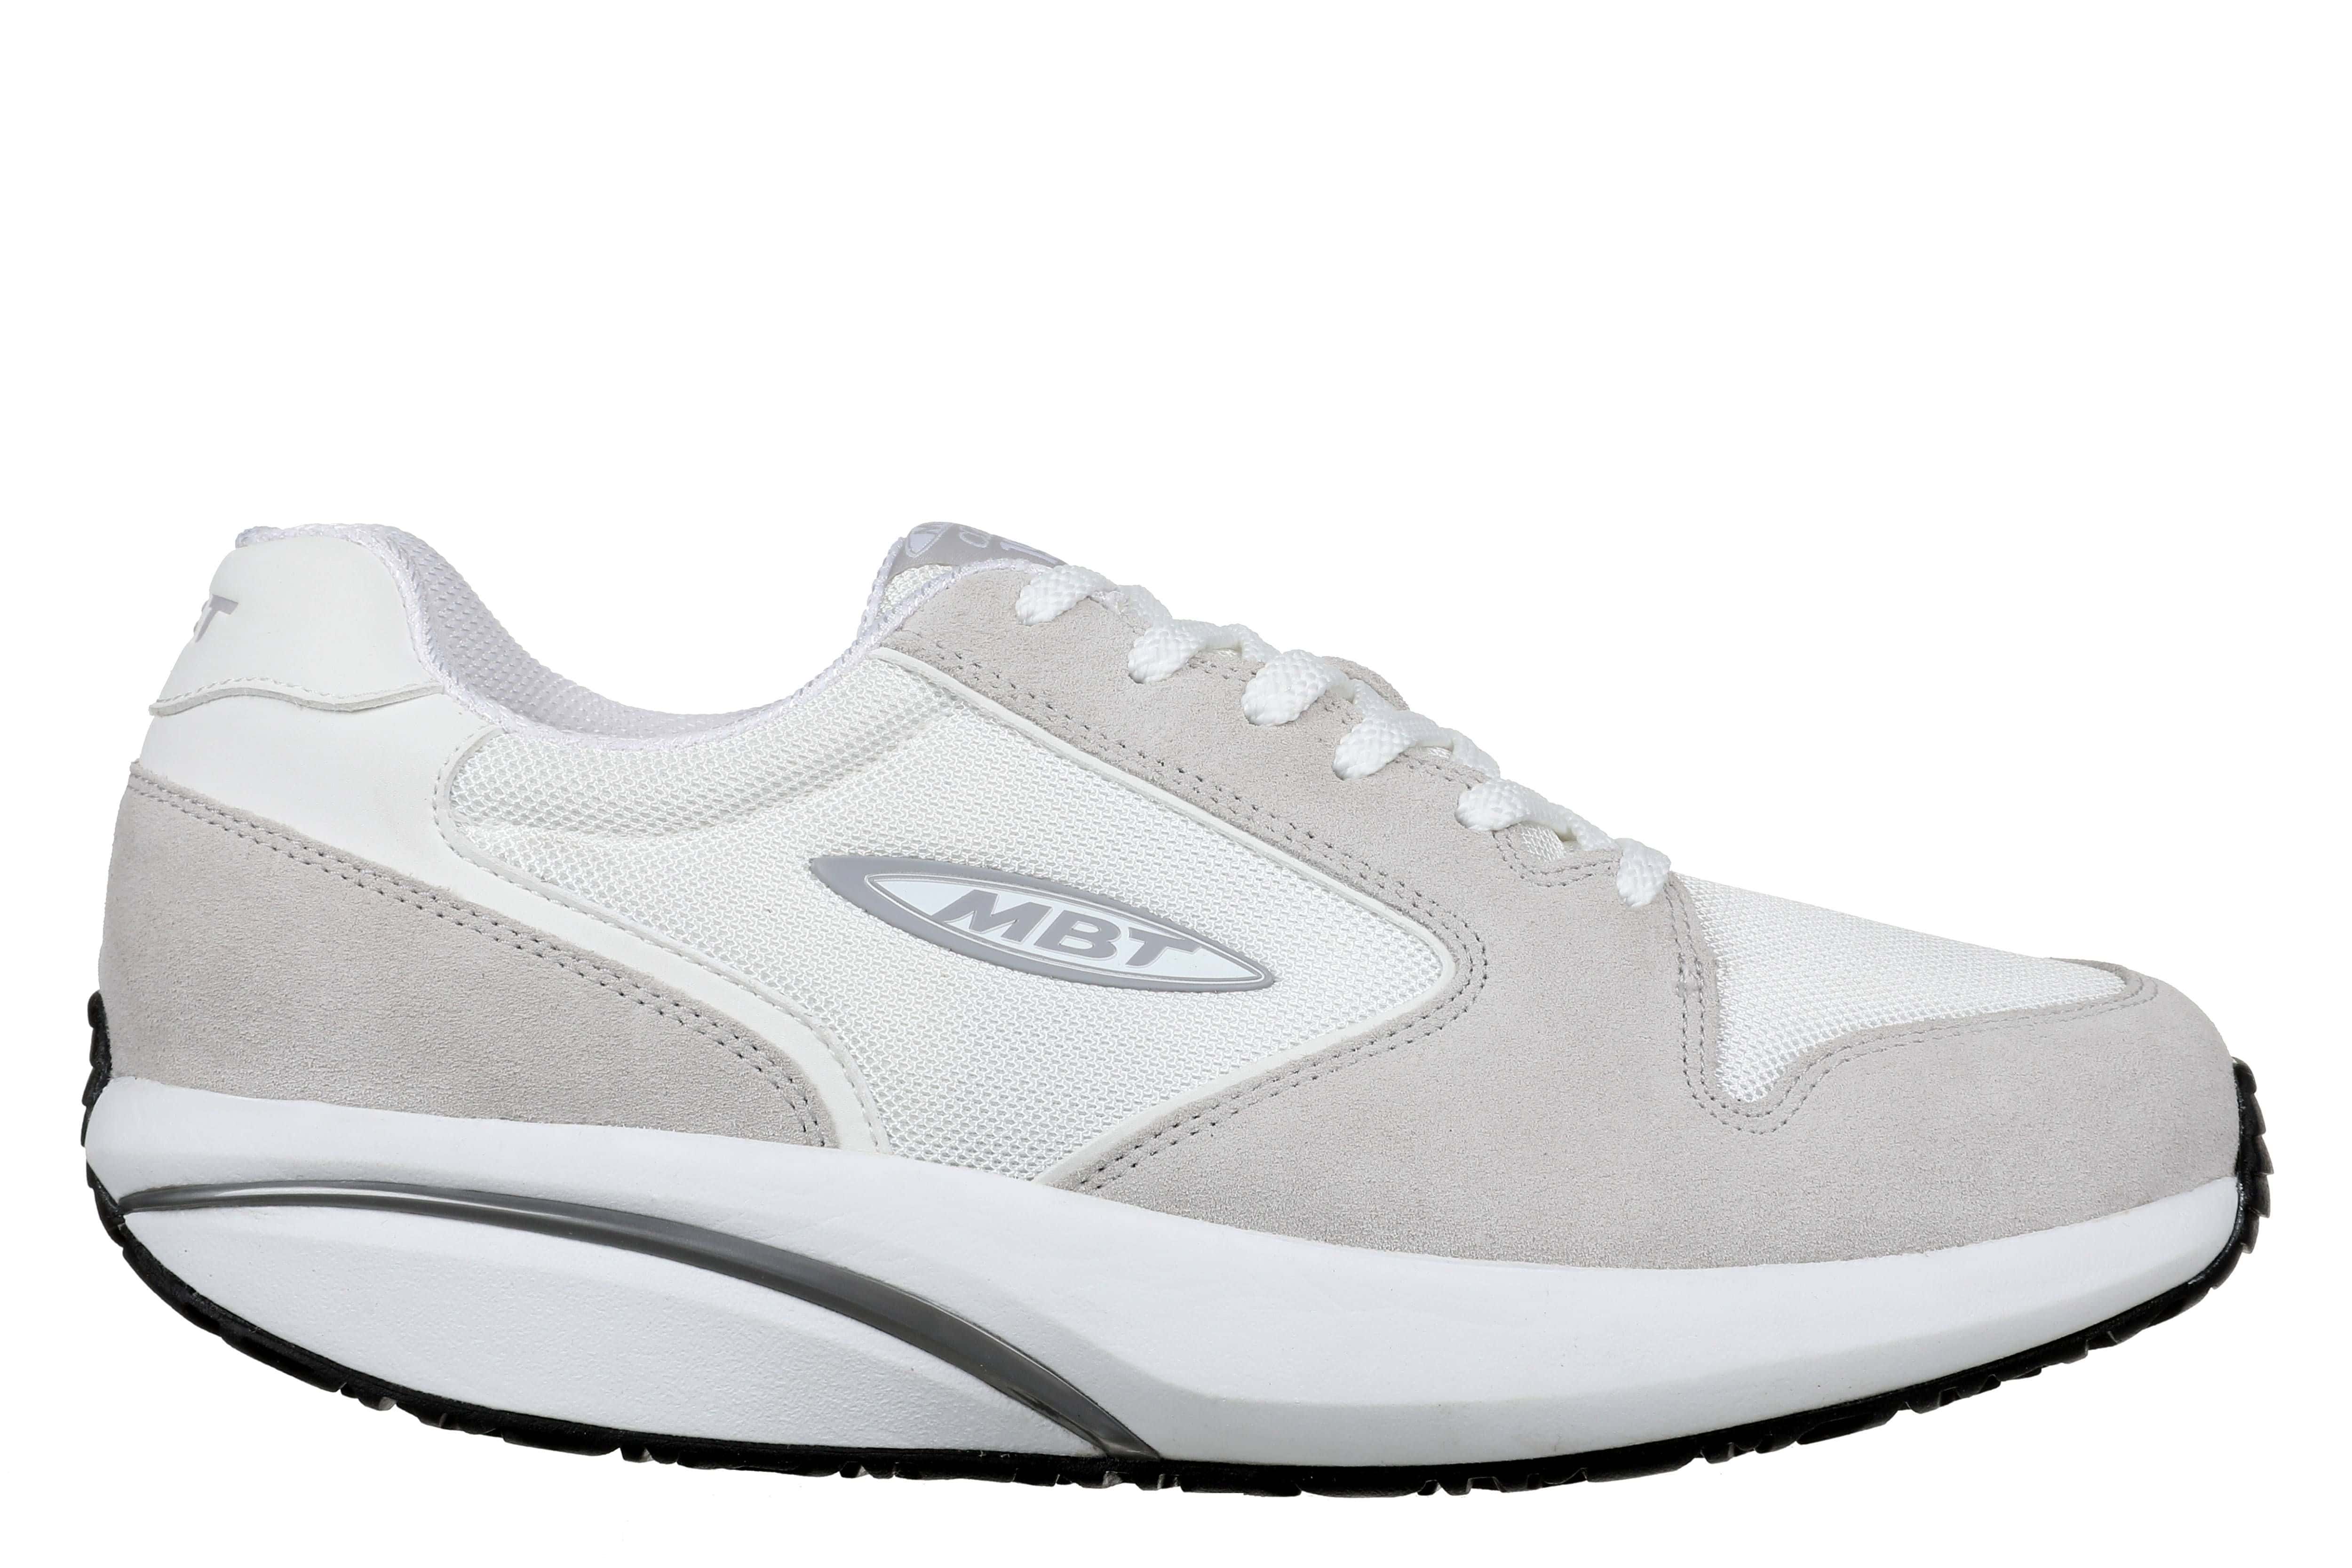 MBT SNEAKERS WOMAN MBT-1997 CLASSIC W WHITE